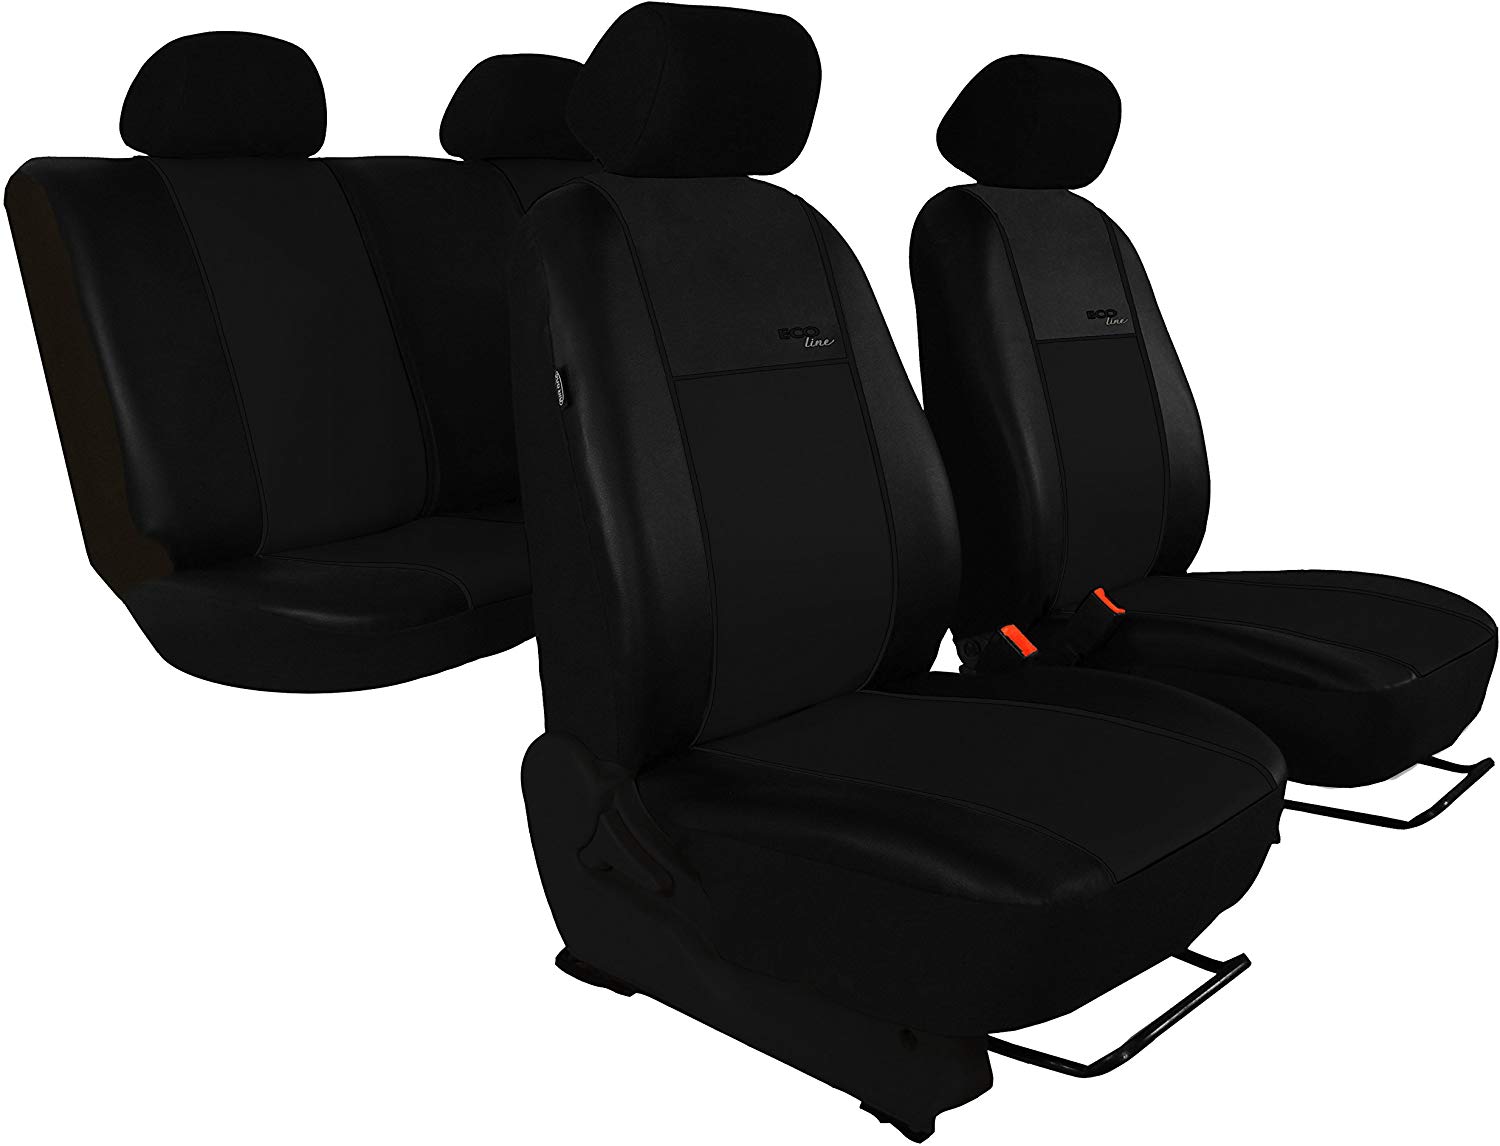 Customised Nissan Qashqai Car Seat Covers High Quality II Design Eco-Line () Available in 7 Colors)